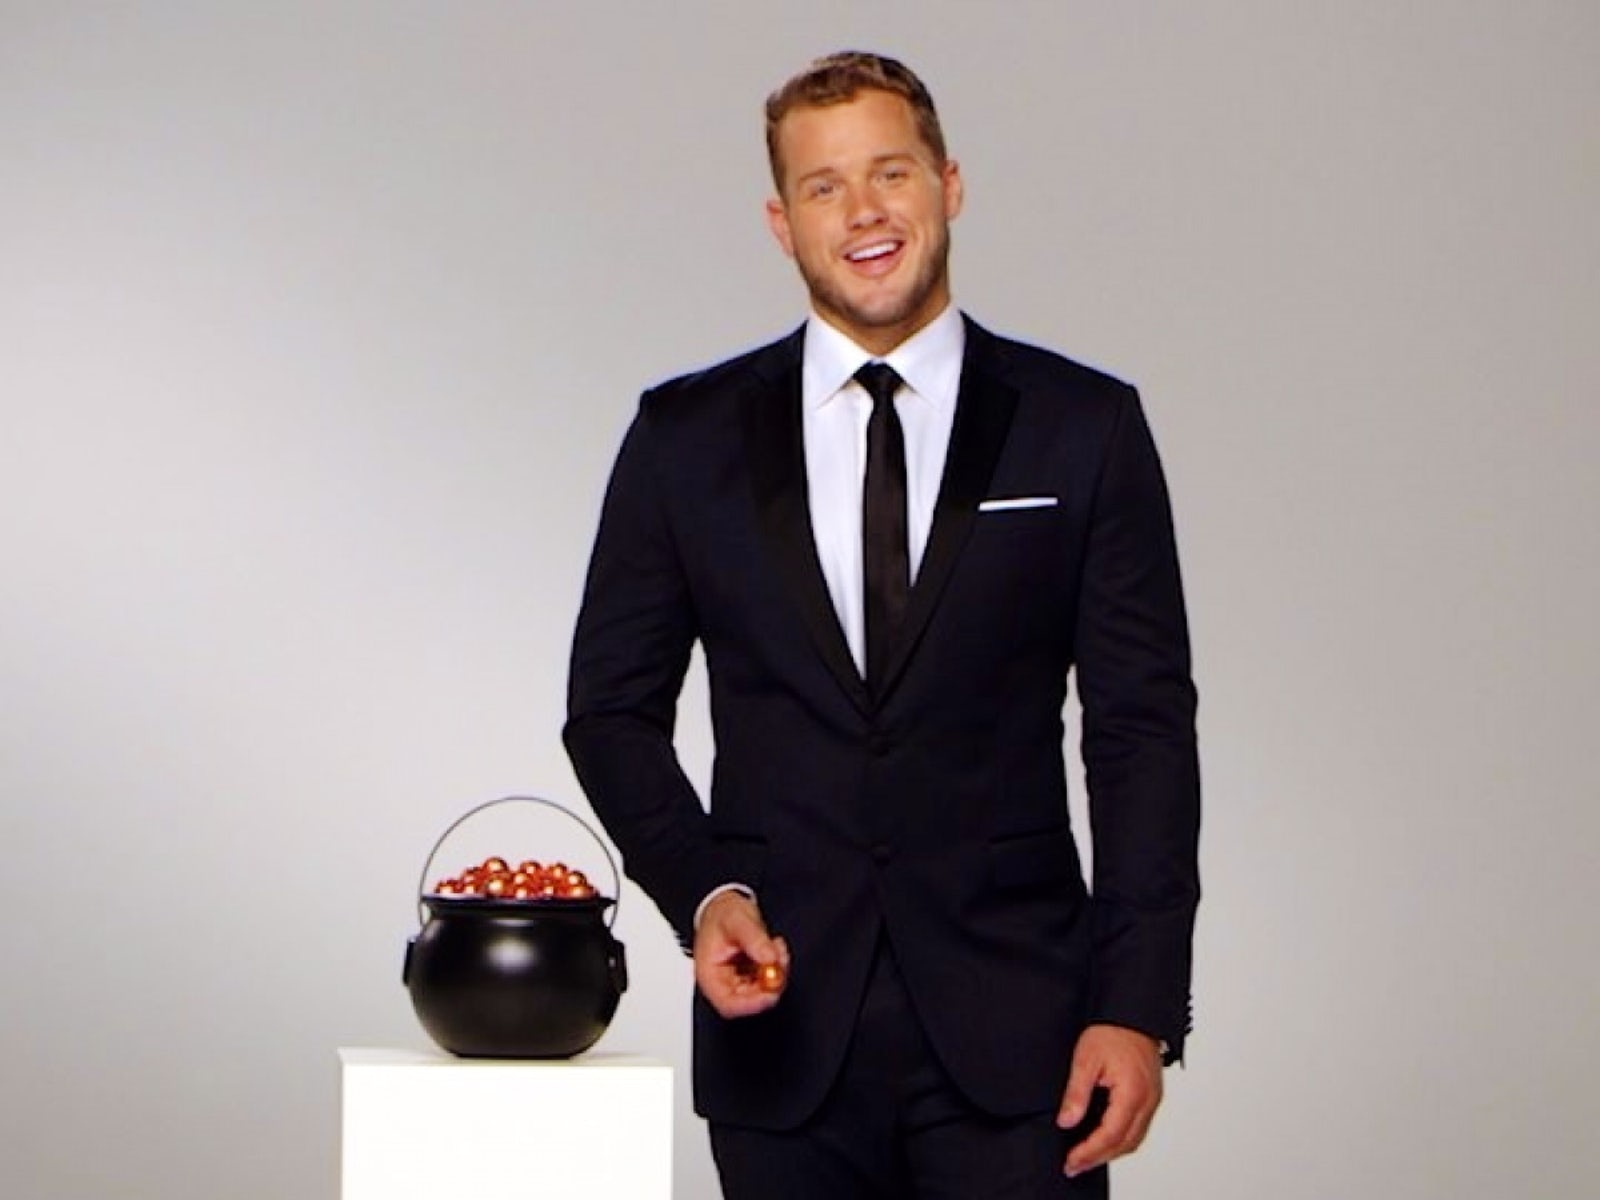 Colton Underwood introduces himself in first 'The Bachelor' Season 23